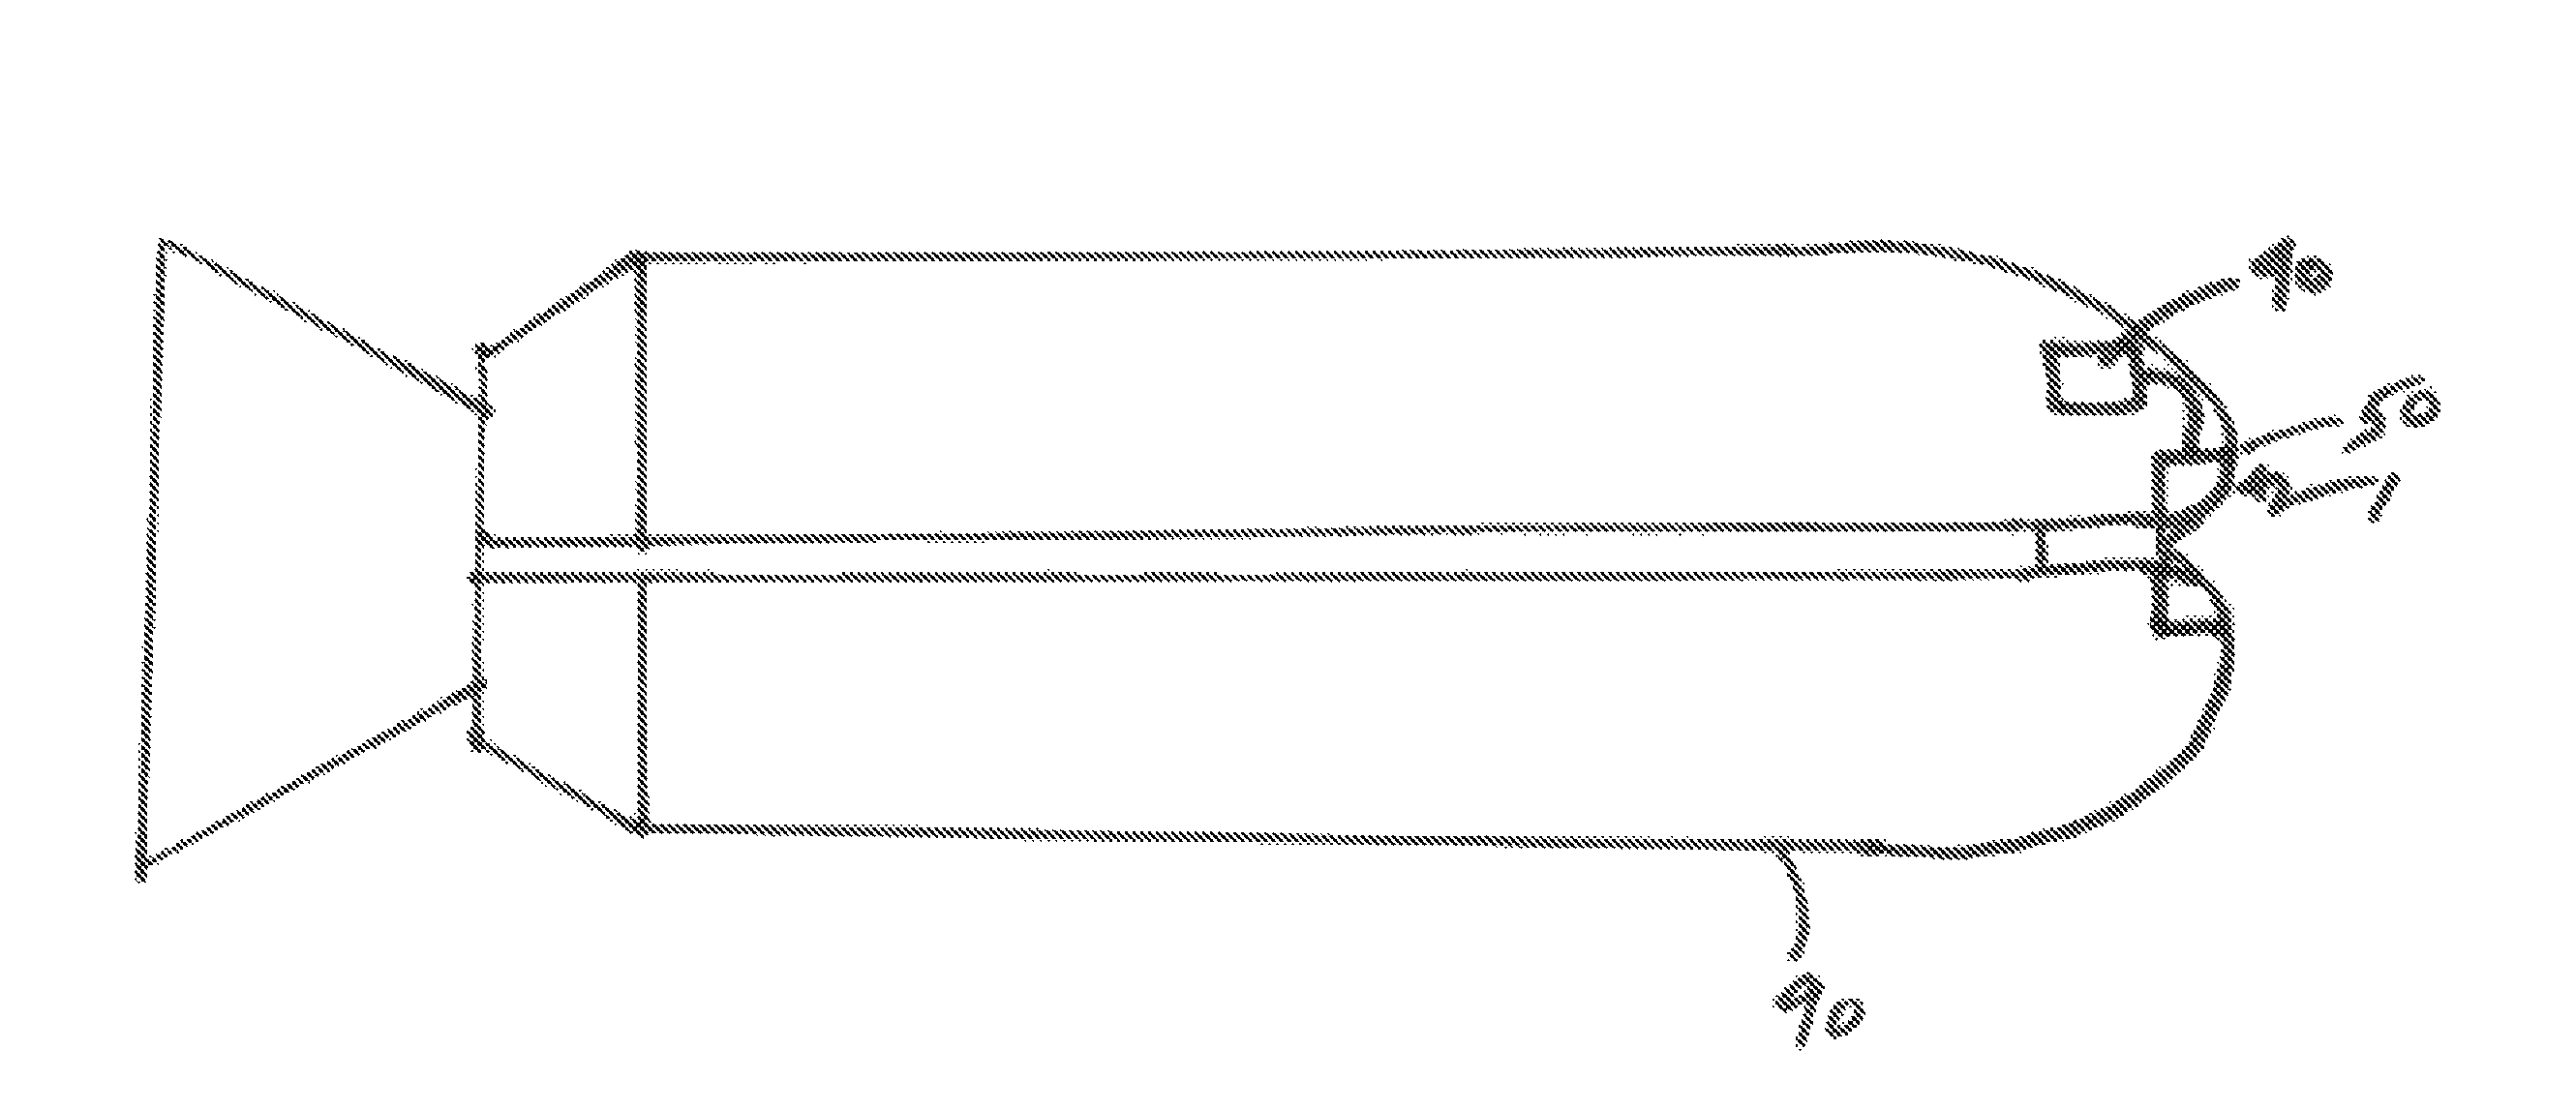 Apparatus and methods for hypersonic nosecone